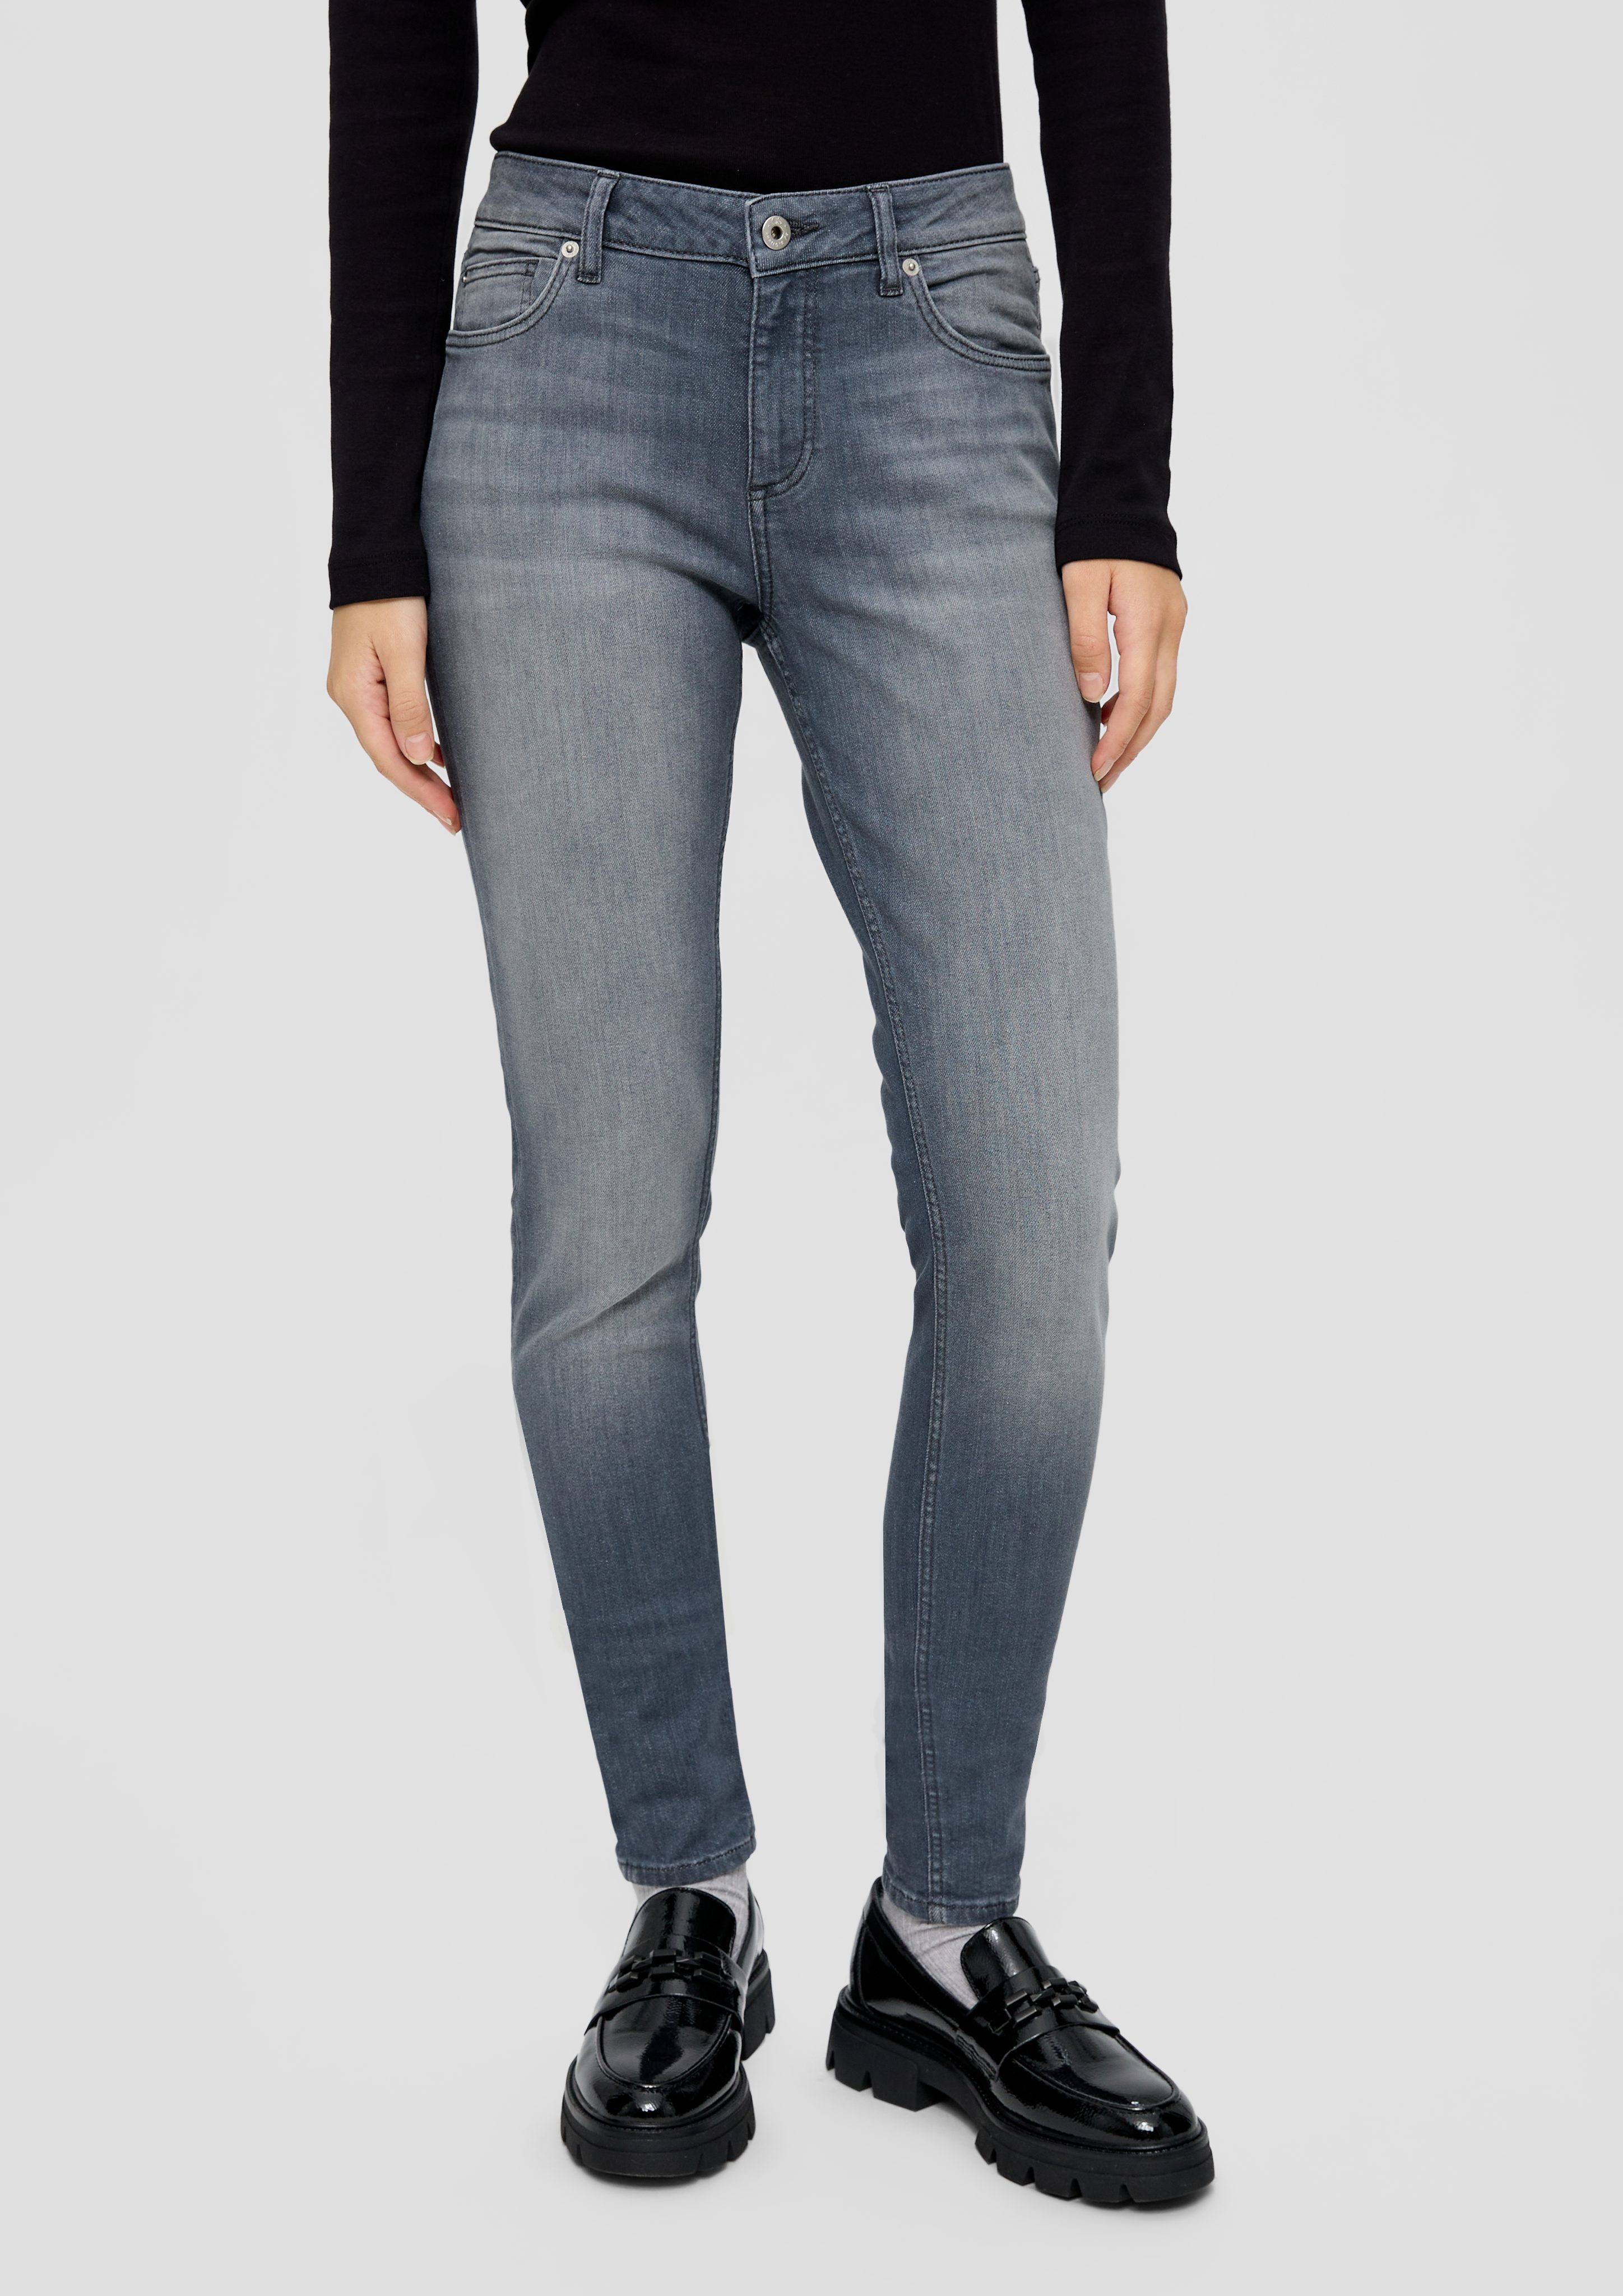 QS Stoffhose Jeans Sadie / Waschung, Fit Mid Leg / / Skinny Label-Patch Rise Skinny